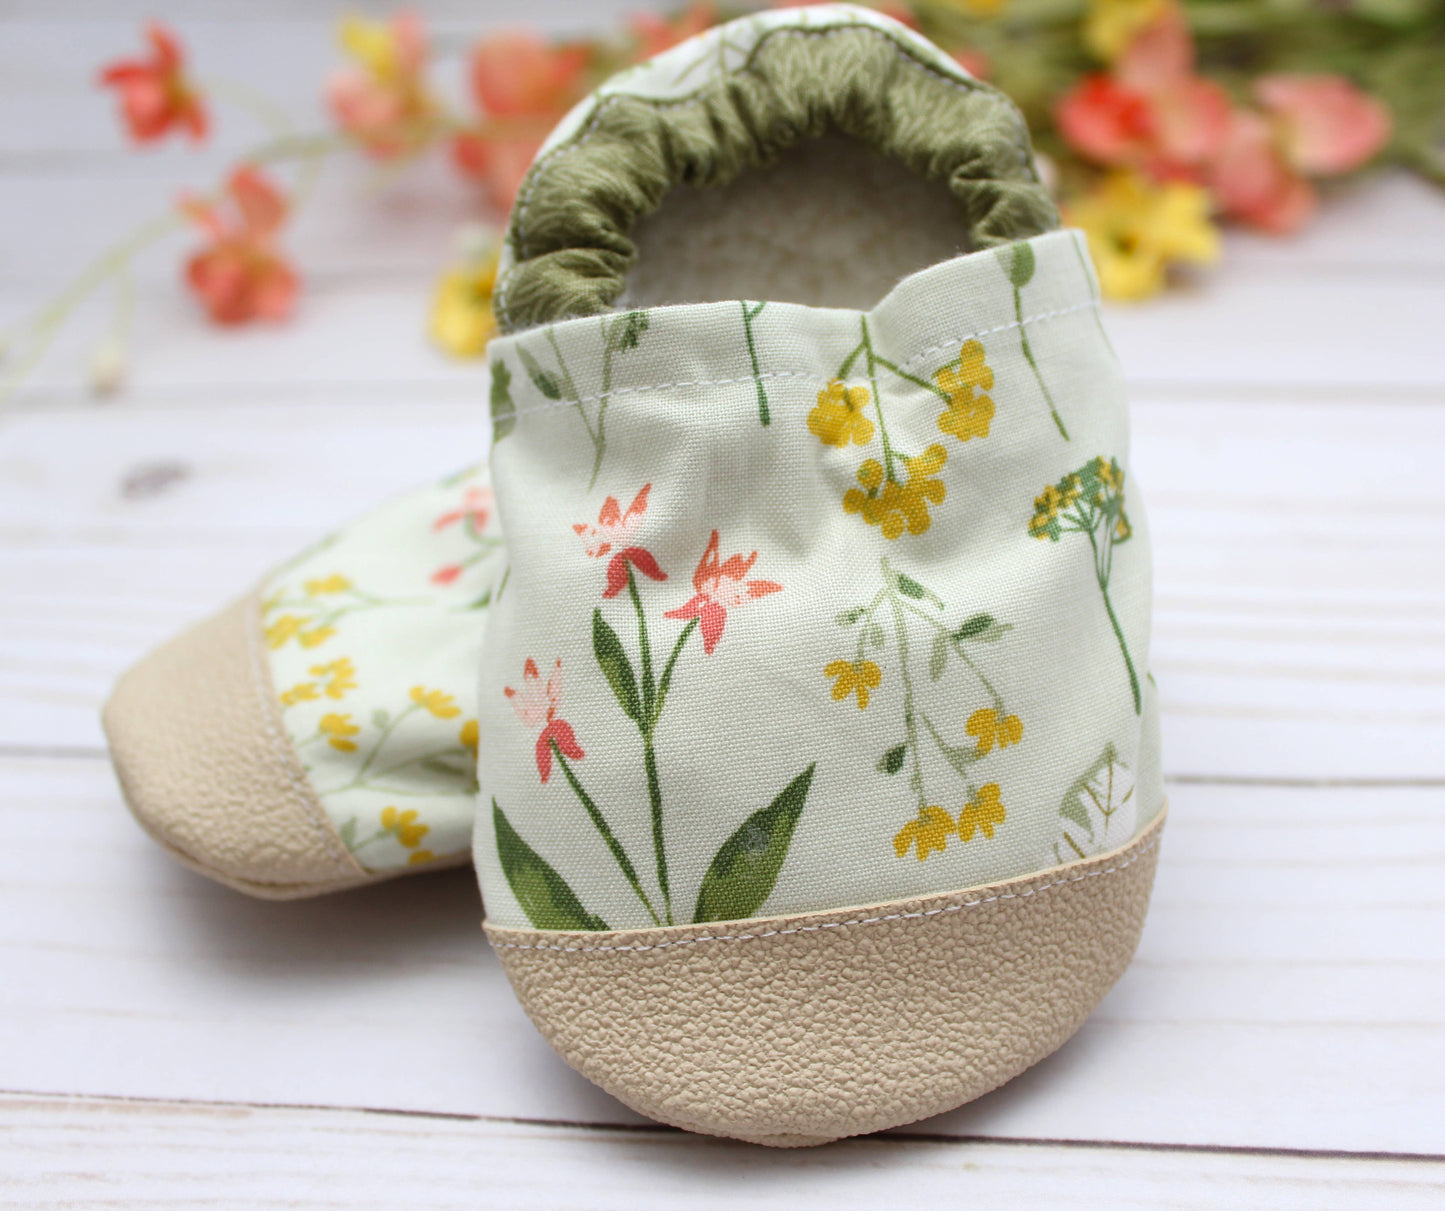 Scooter Booties - Tea with Bea Baby Shoes: 0 - 6 months